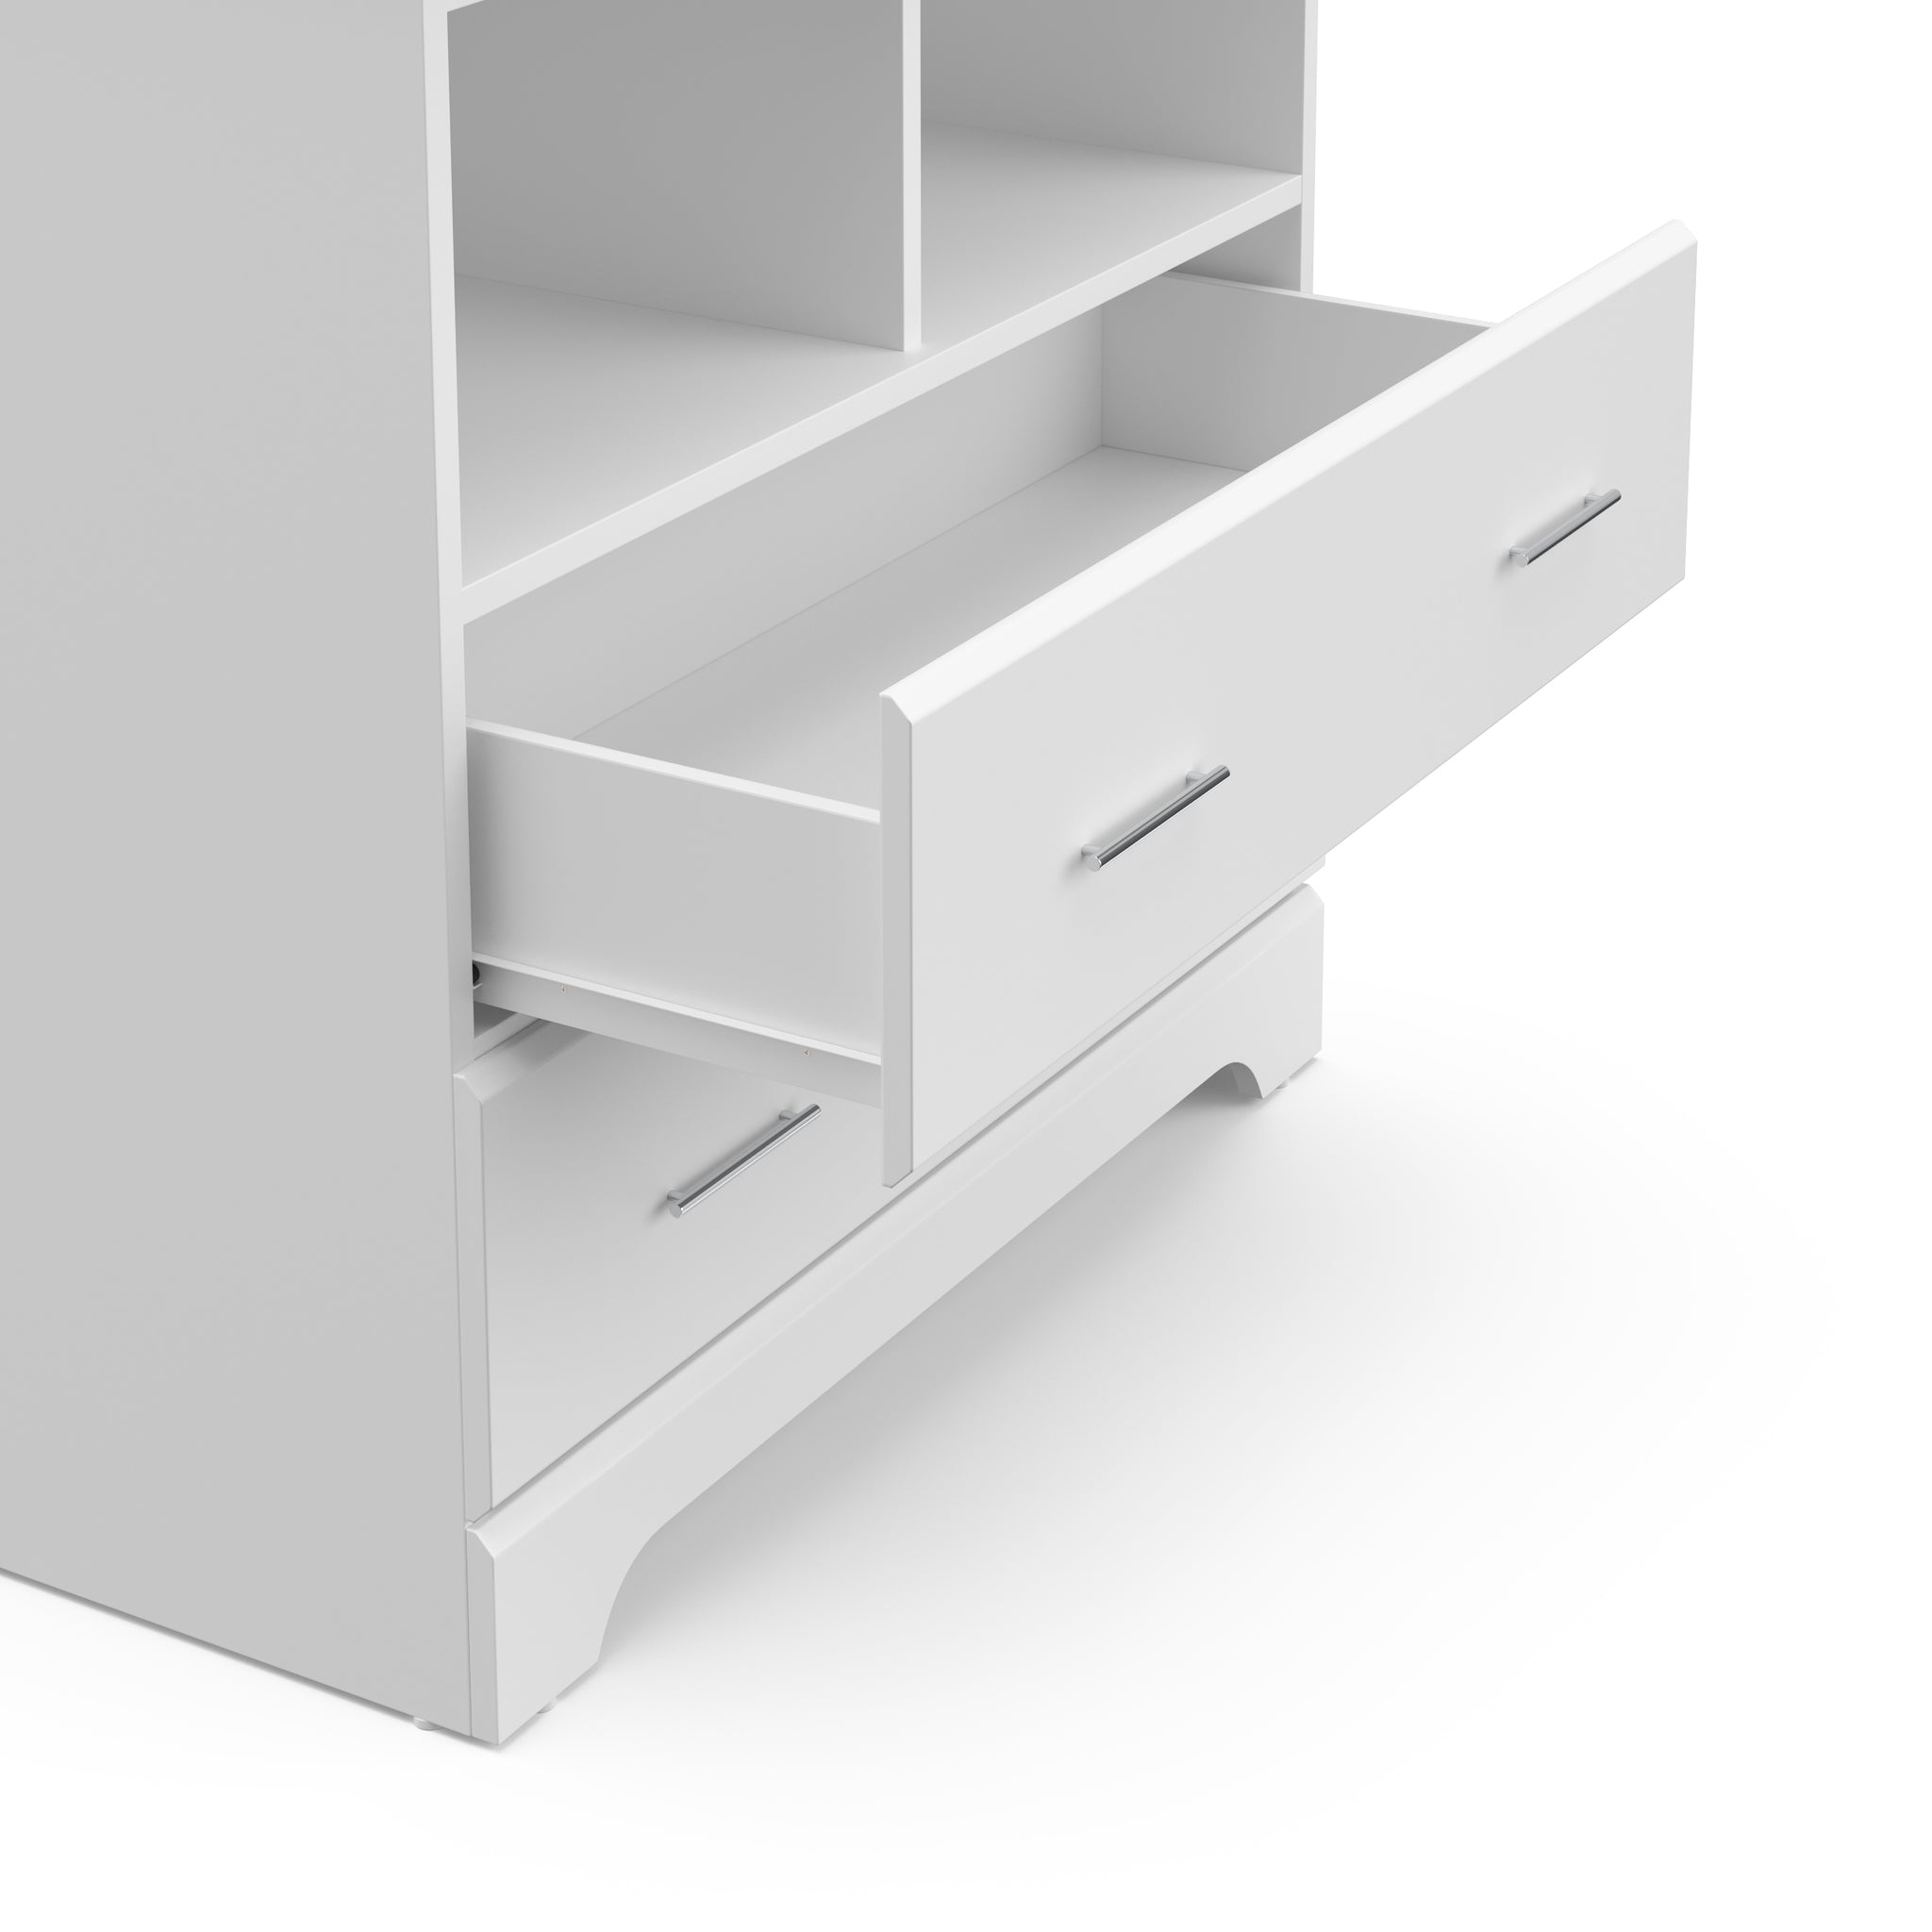 close-up view of white 2 drawer chest with one open drawer